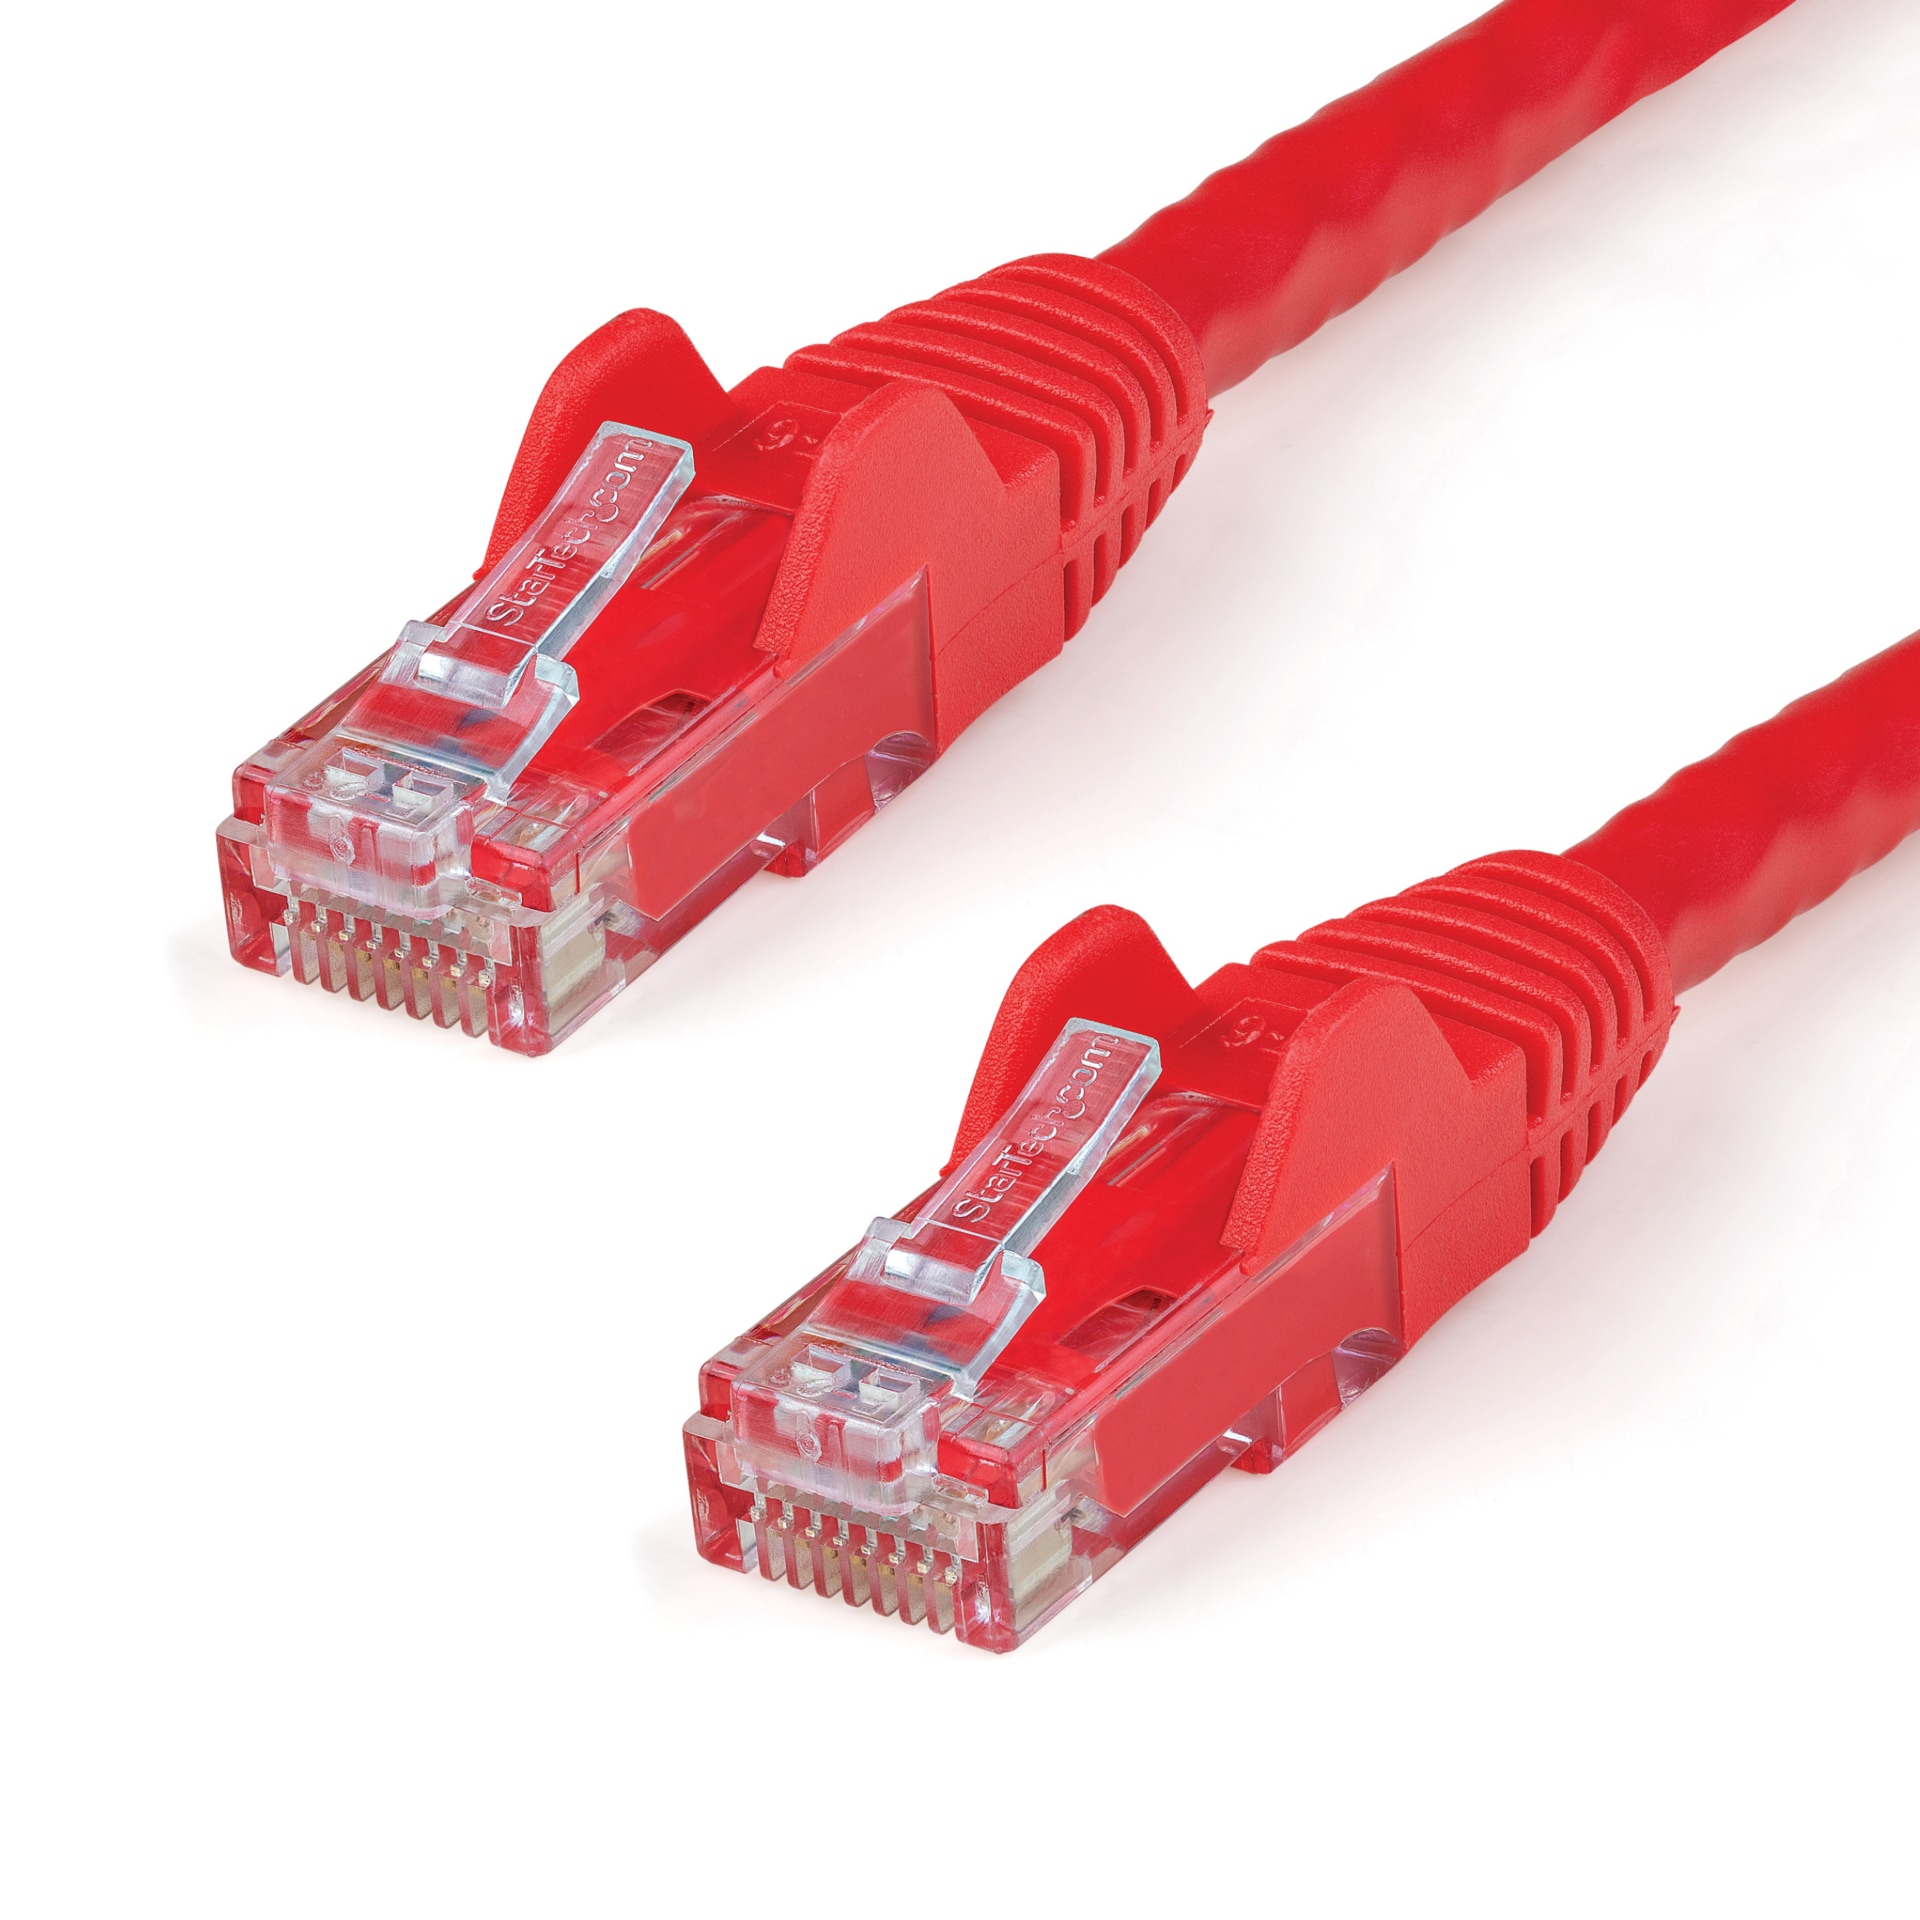 StarTech.com 5ft CAT6 Ethernet Cable - Red Snagless Gigabit - 100W PoE UTP 650MHz Category 6 Patch Cord UL Certified